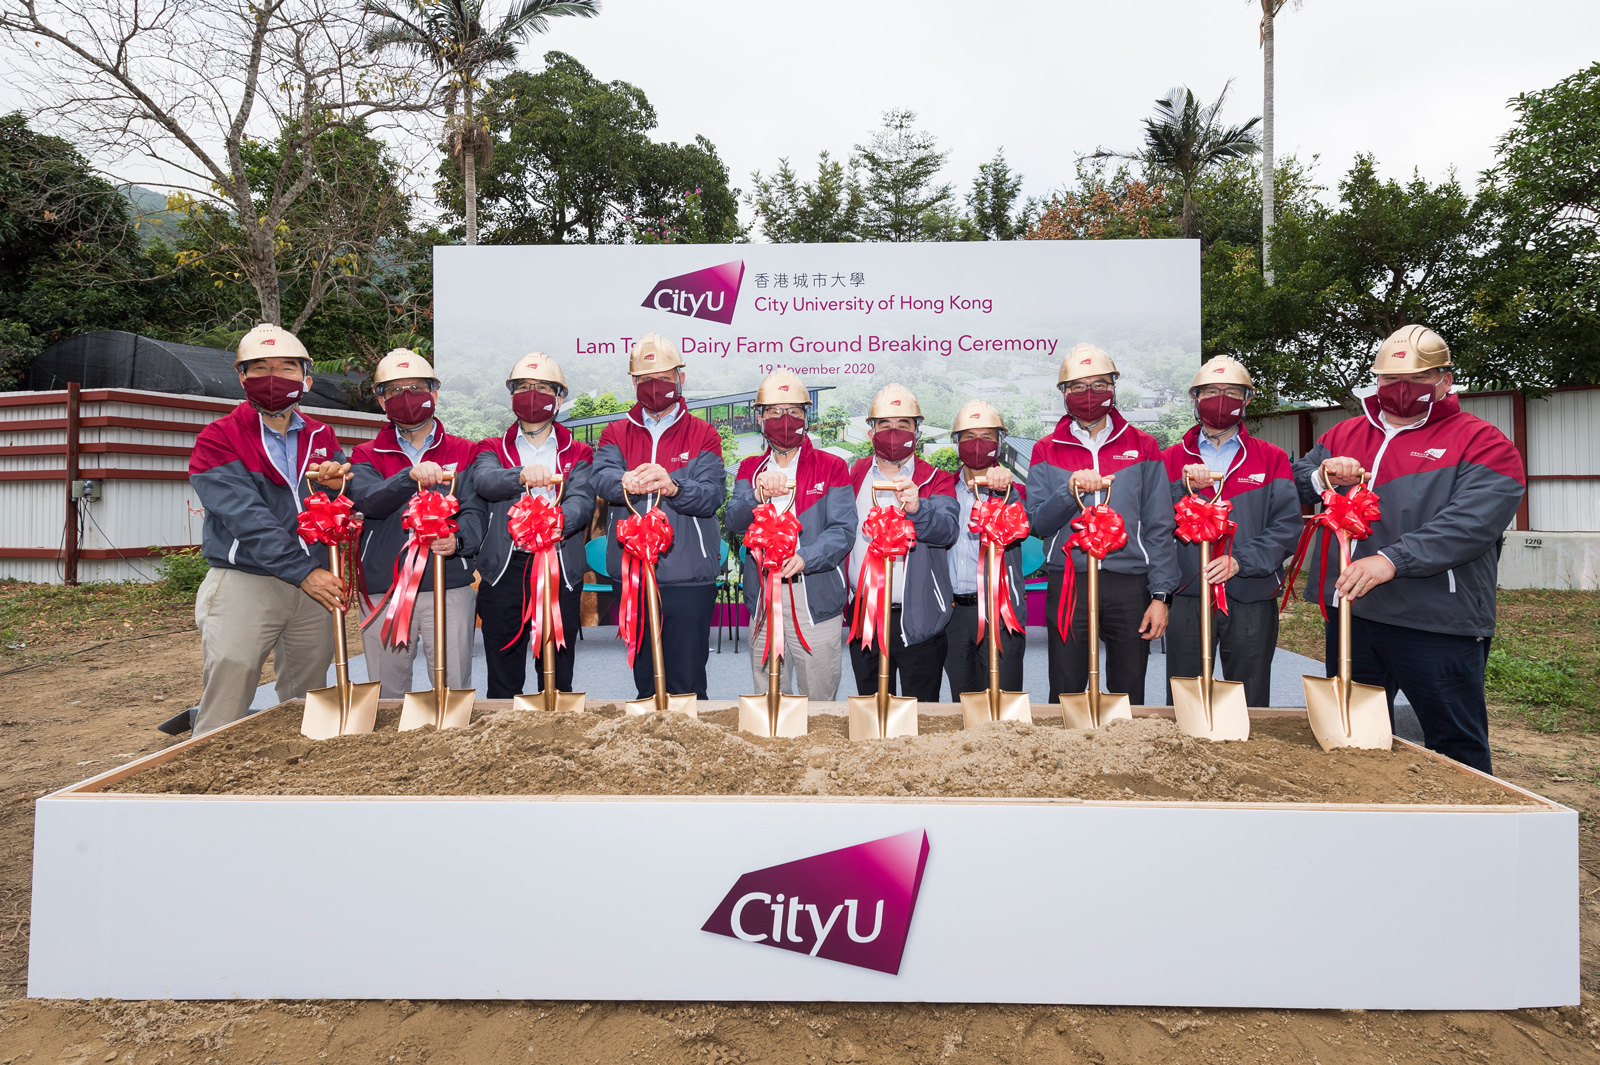 President Kuo, together with senior management and staff from veterinary medicine, witness the ground-breaking ceremony.